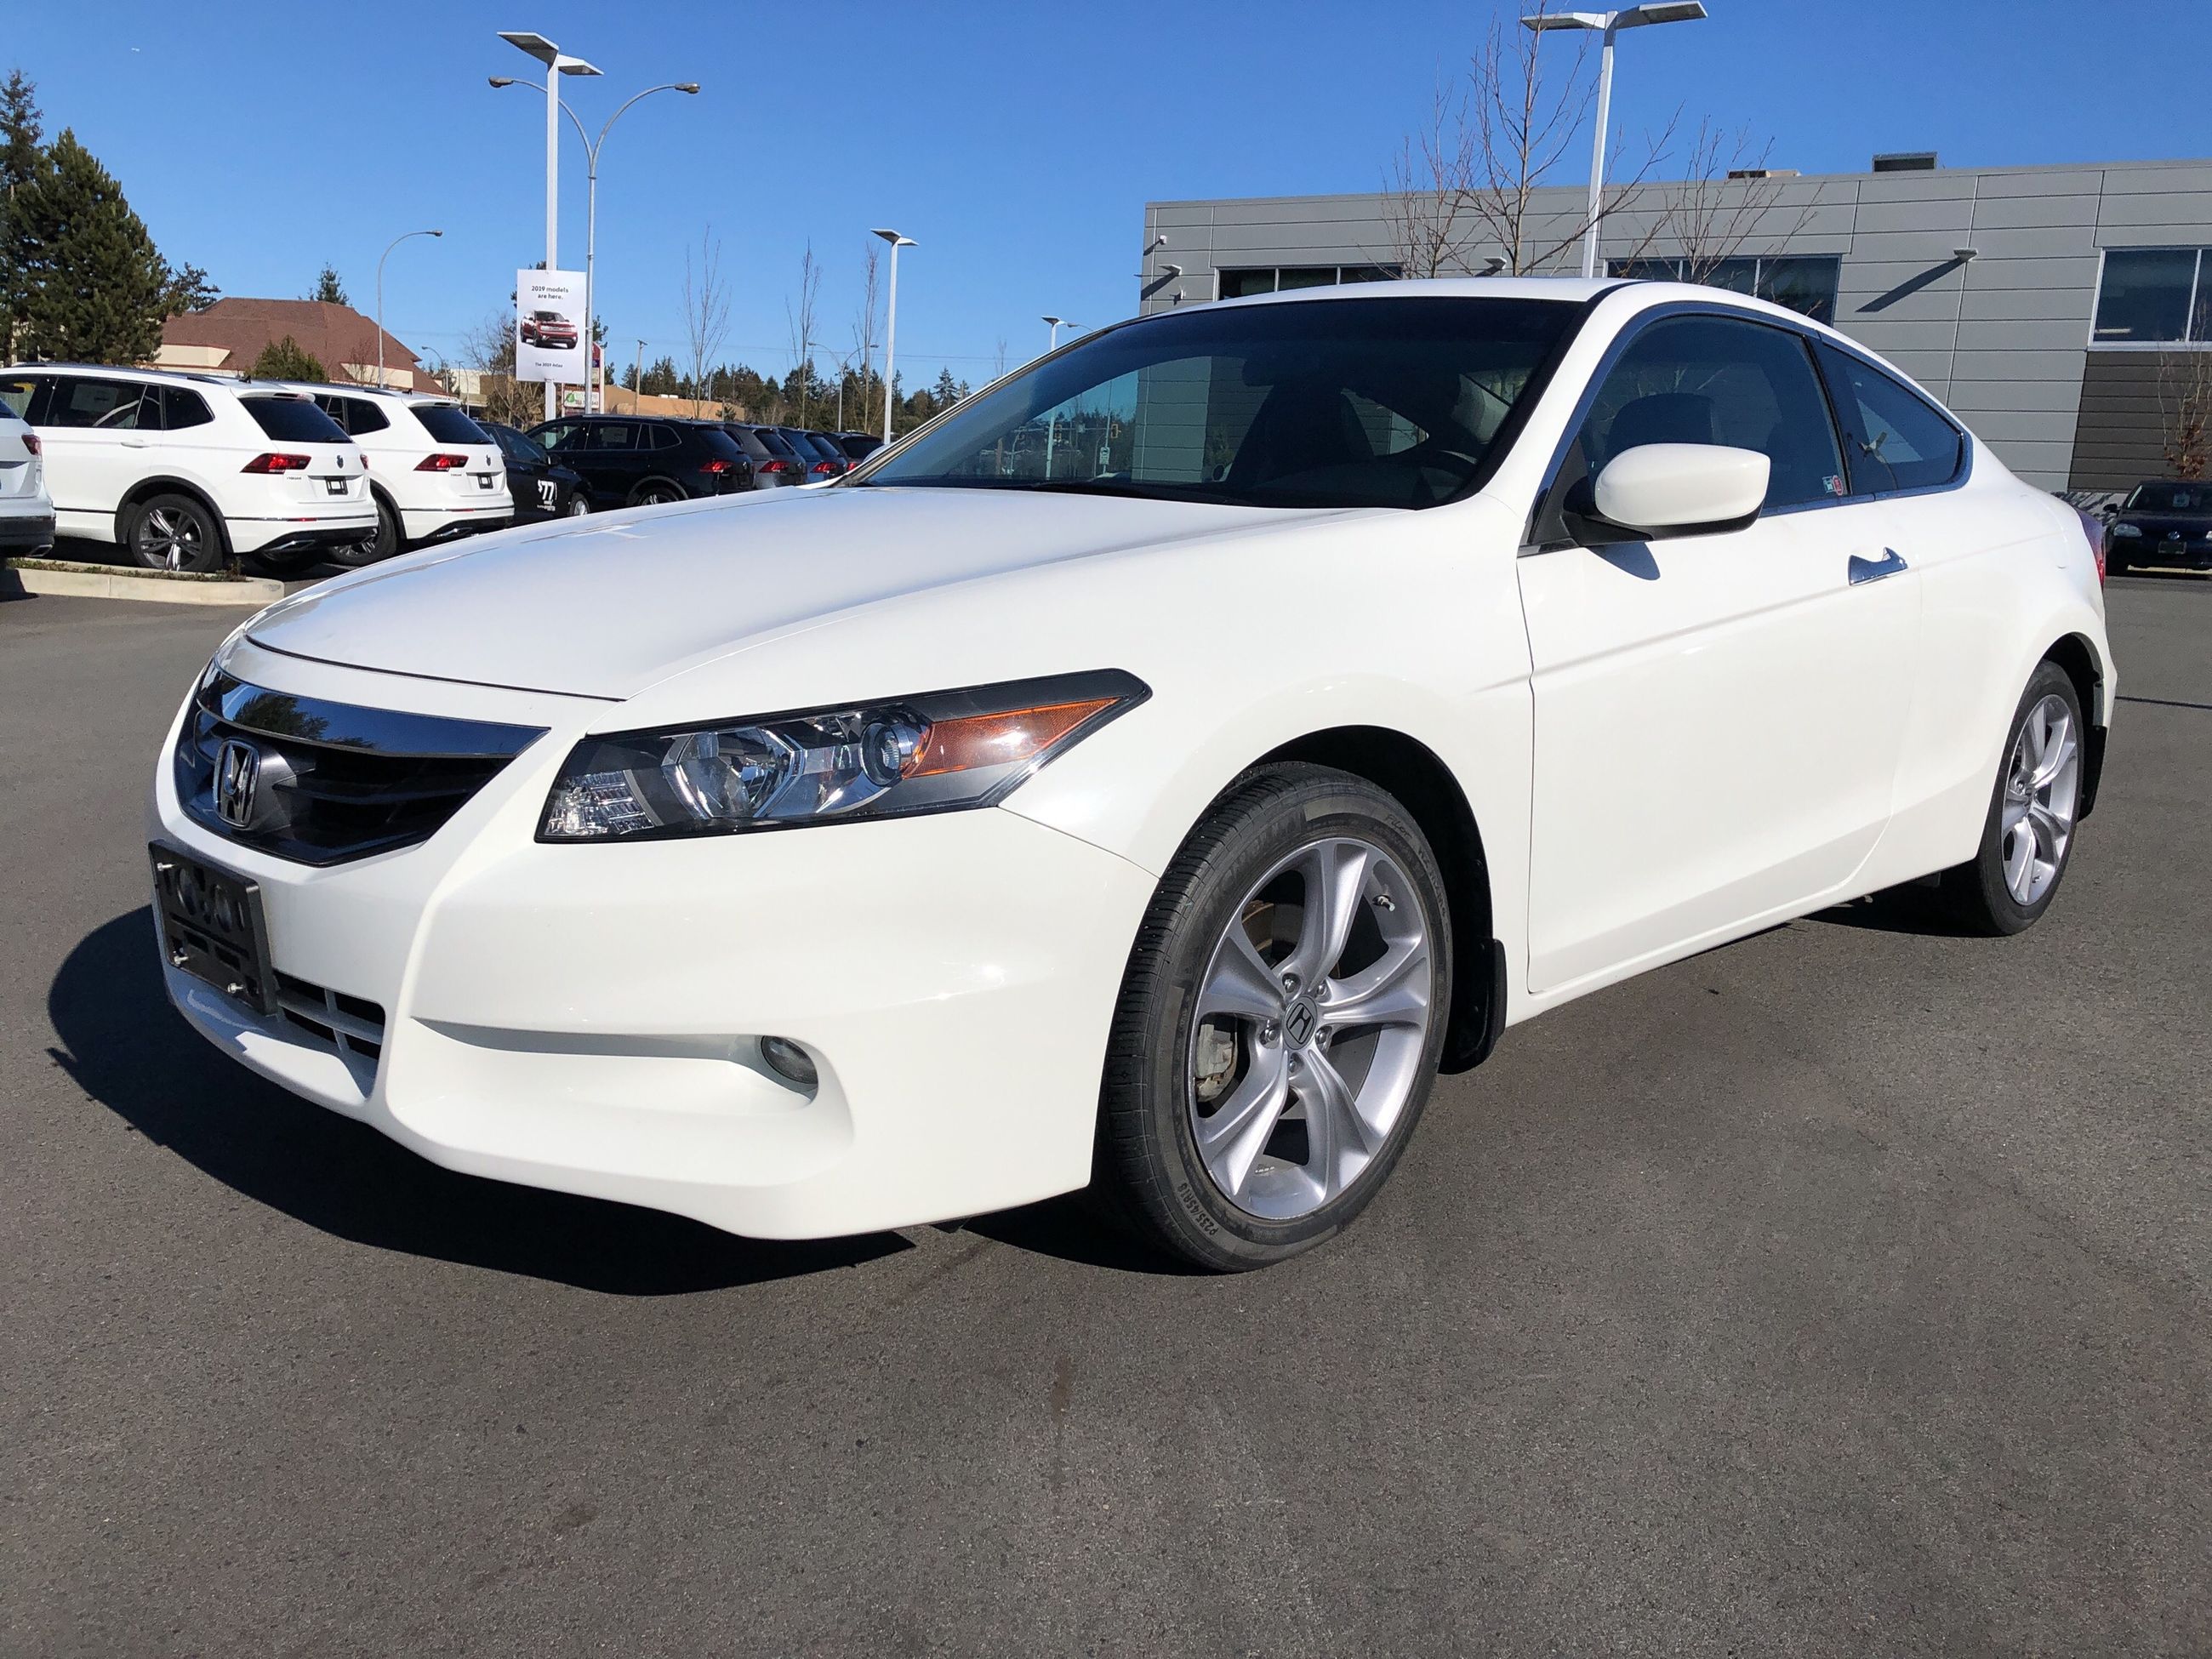 Used 2011 Honda Accord EX-L V6 Coupe w/ Navigation for Sale - $15995